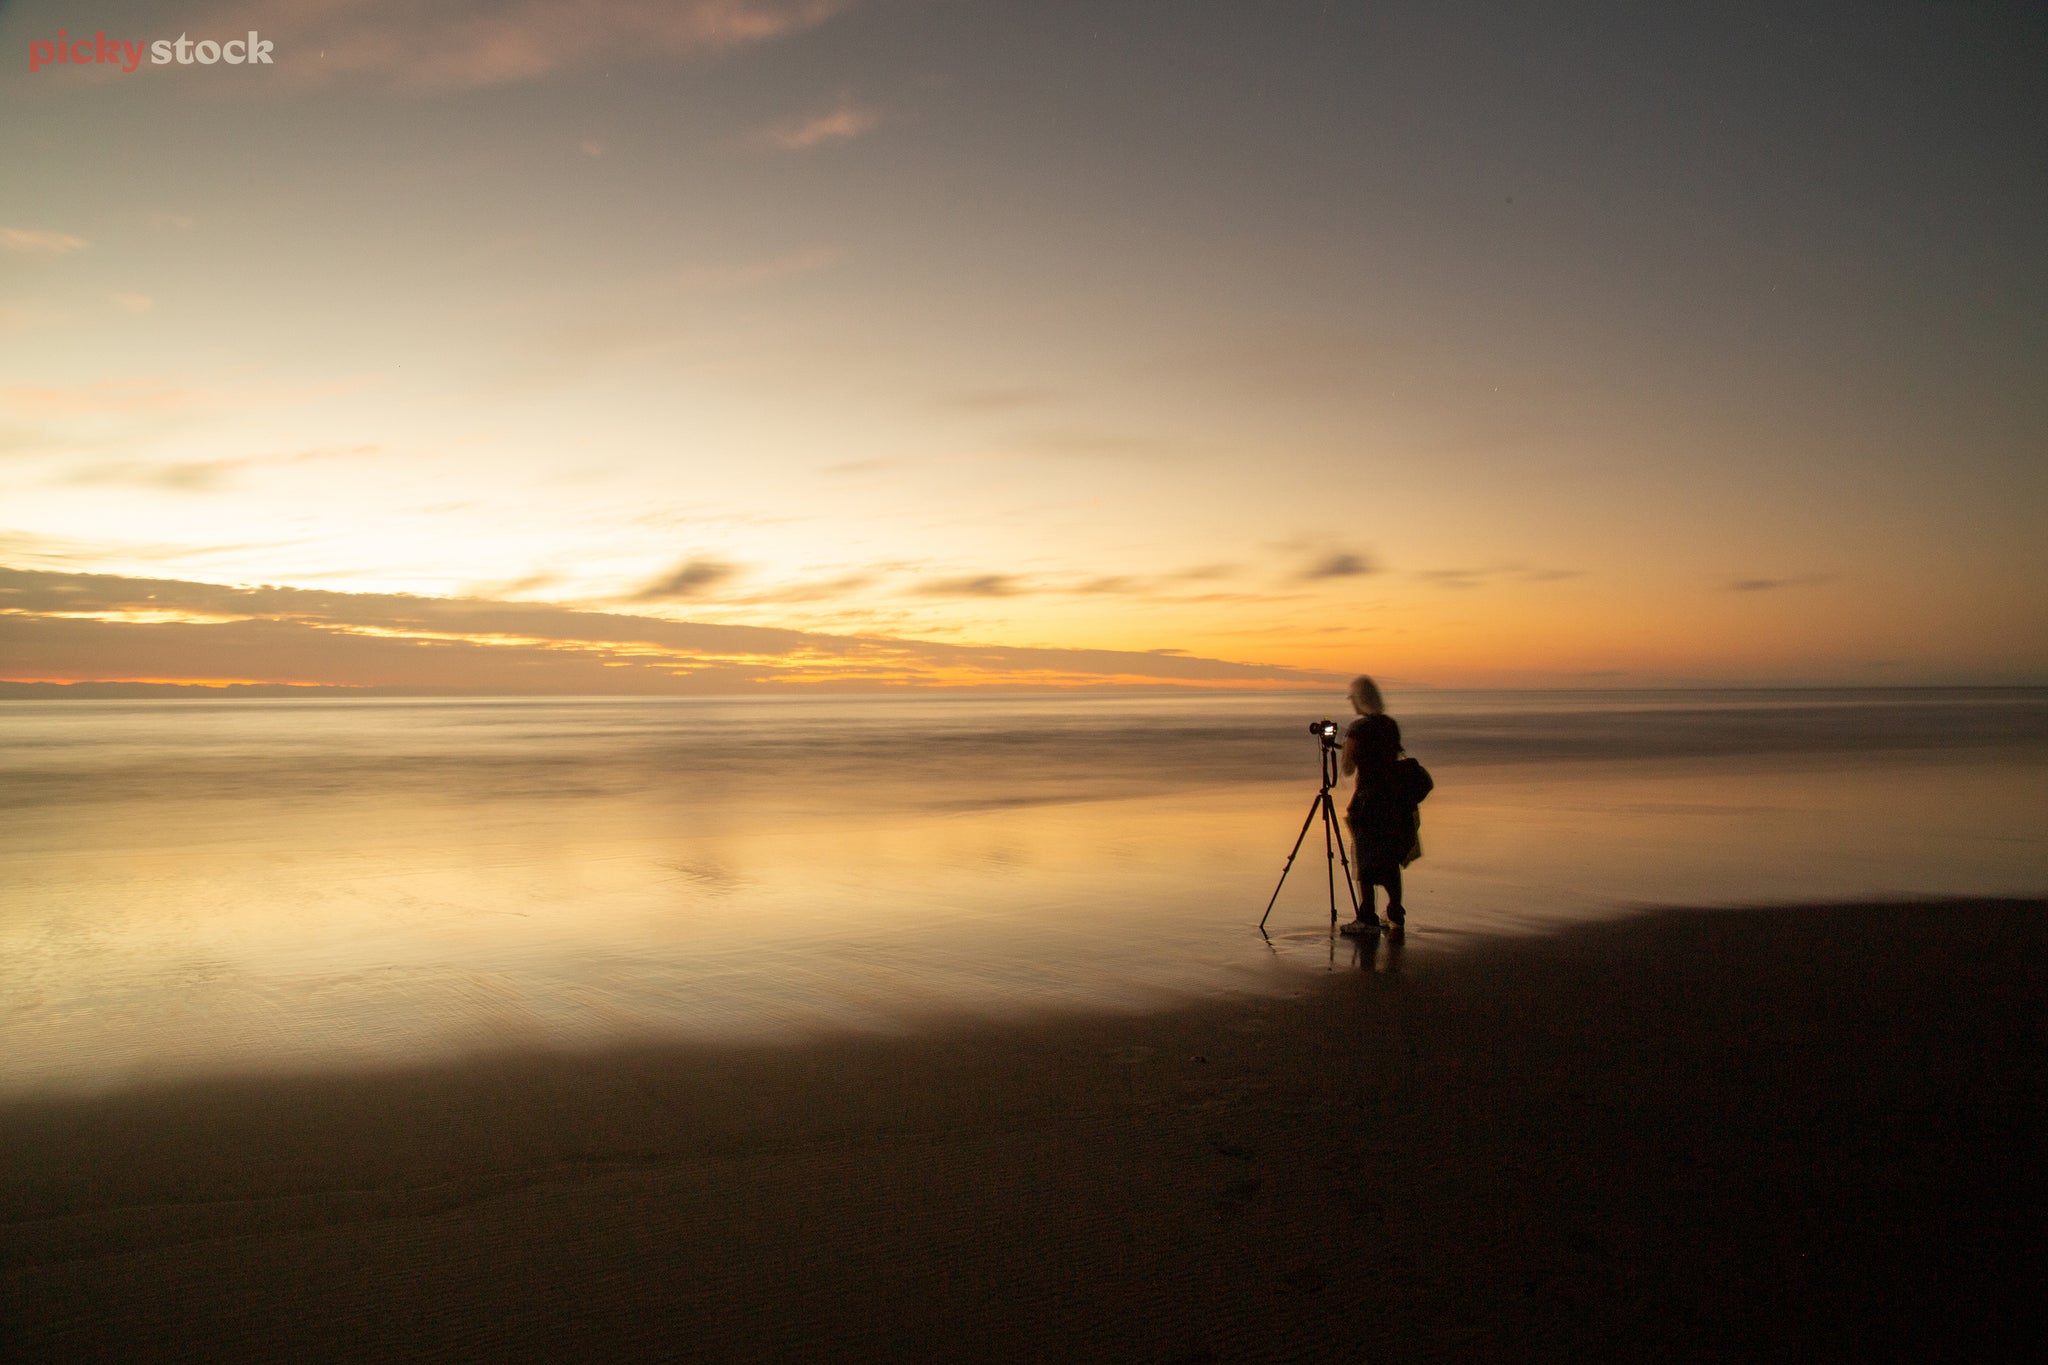 Landscape of a woman photographing the horizon from a beach, the tide has receded and the tripod buried in the sand creates a shallow bowl of water. The sun crashes like a huge gold wave against the sky.